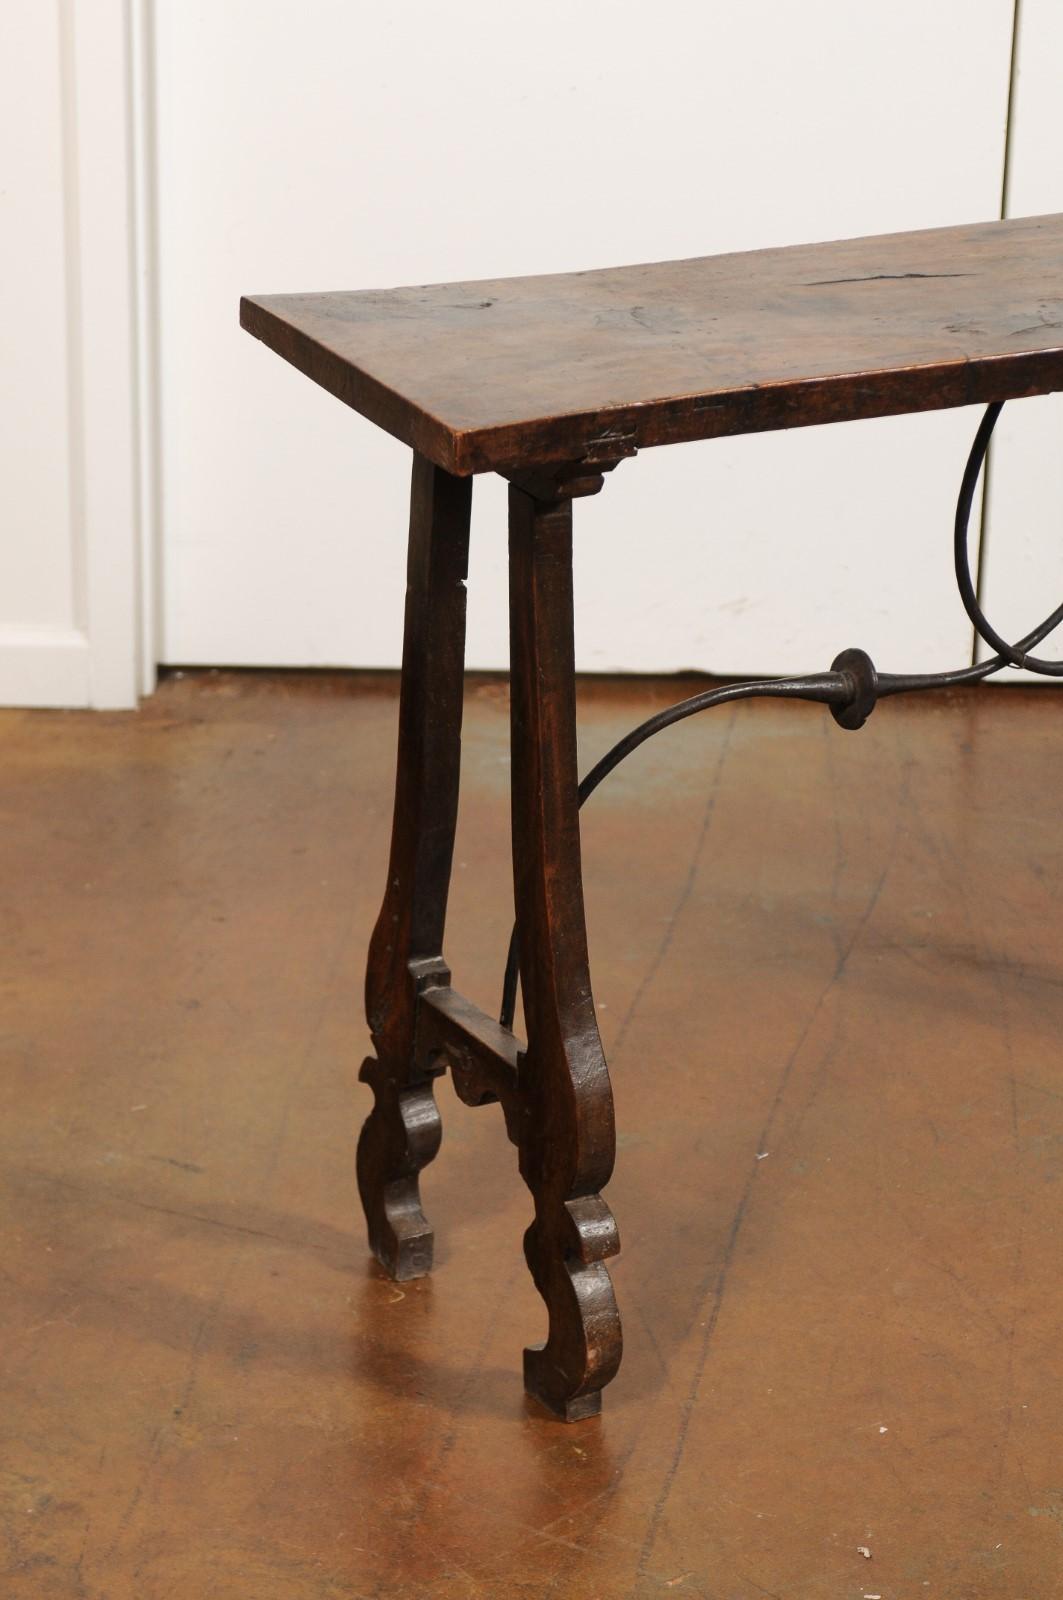 French 19th Century Baroque Walnut Console Table with Lyre Legs and Stretcher (Französisch)